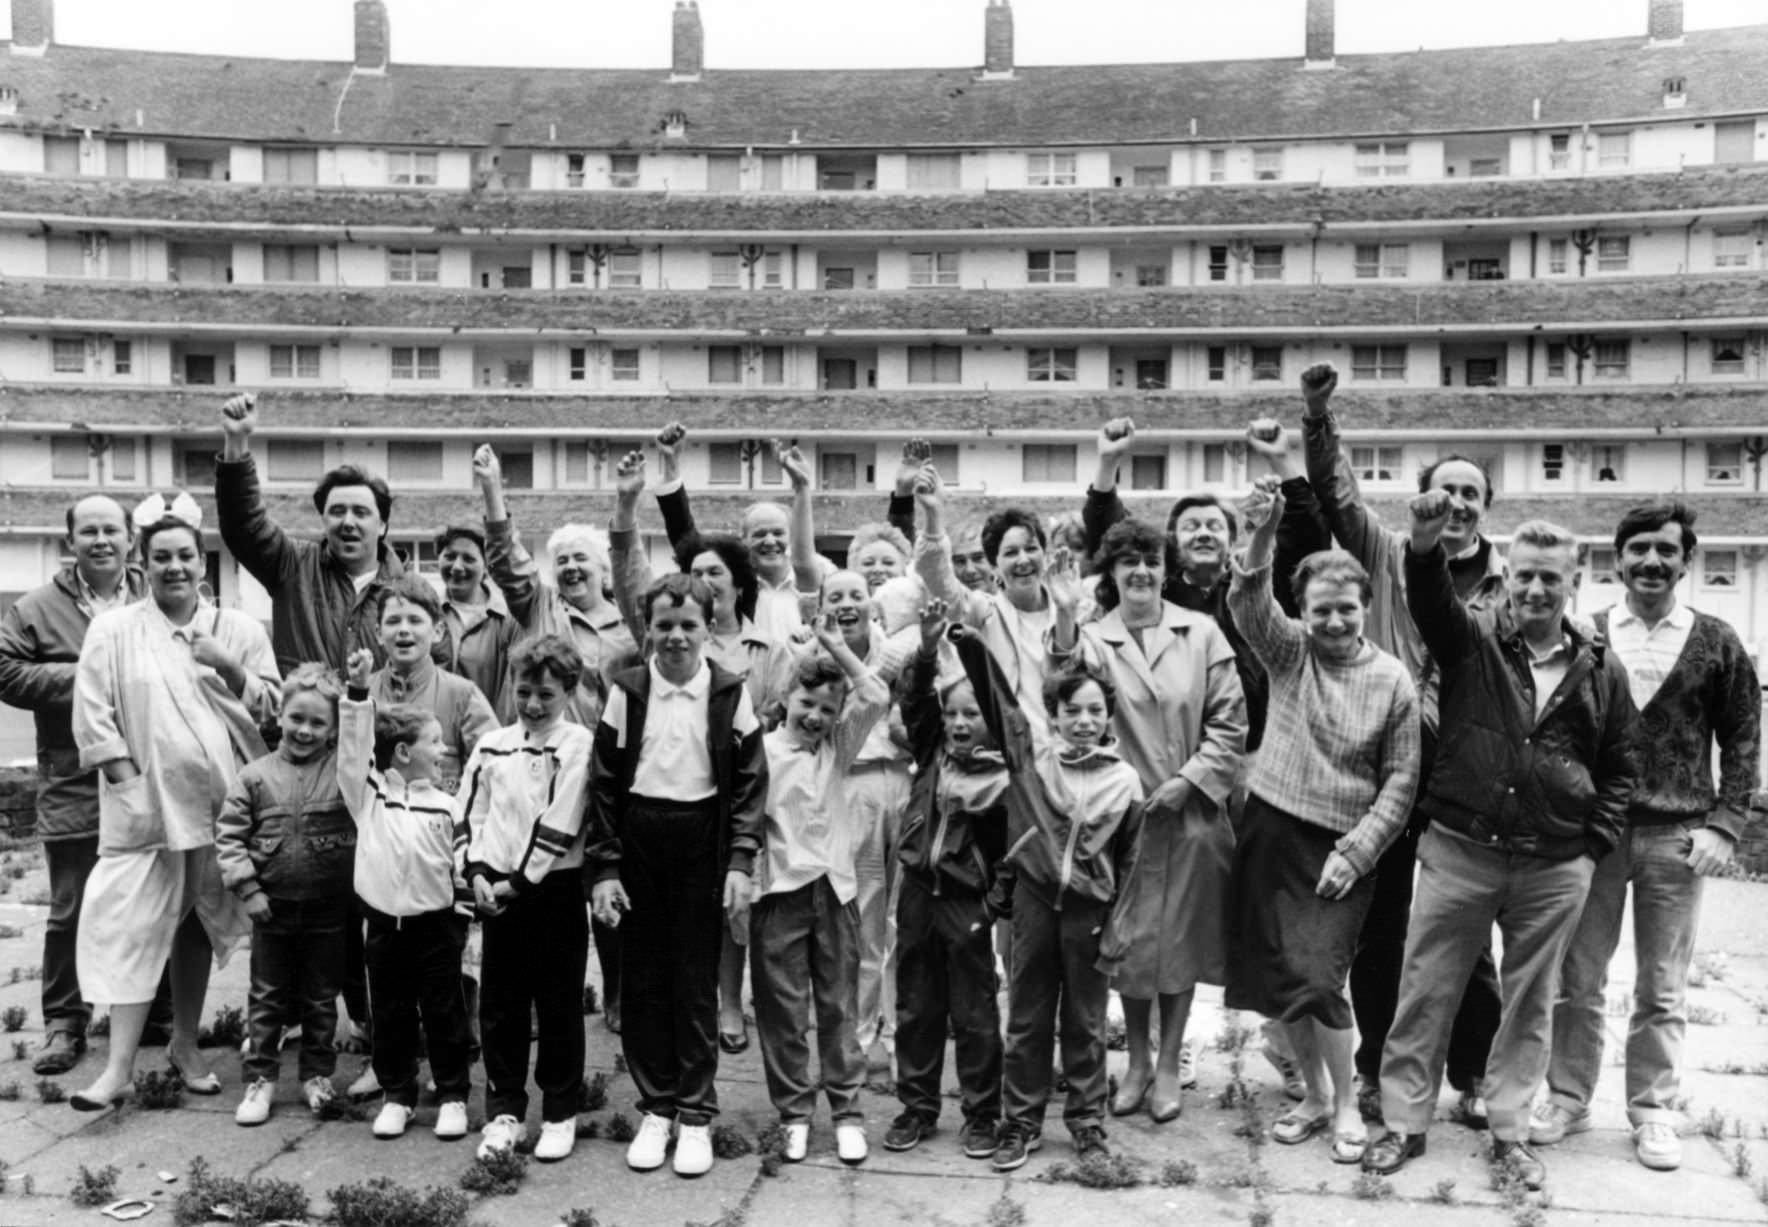 11 families of Gerard Gardens celebrate a victory over Liverpool City Council.